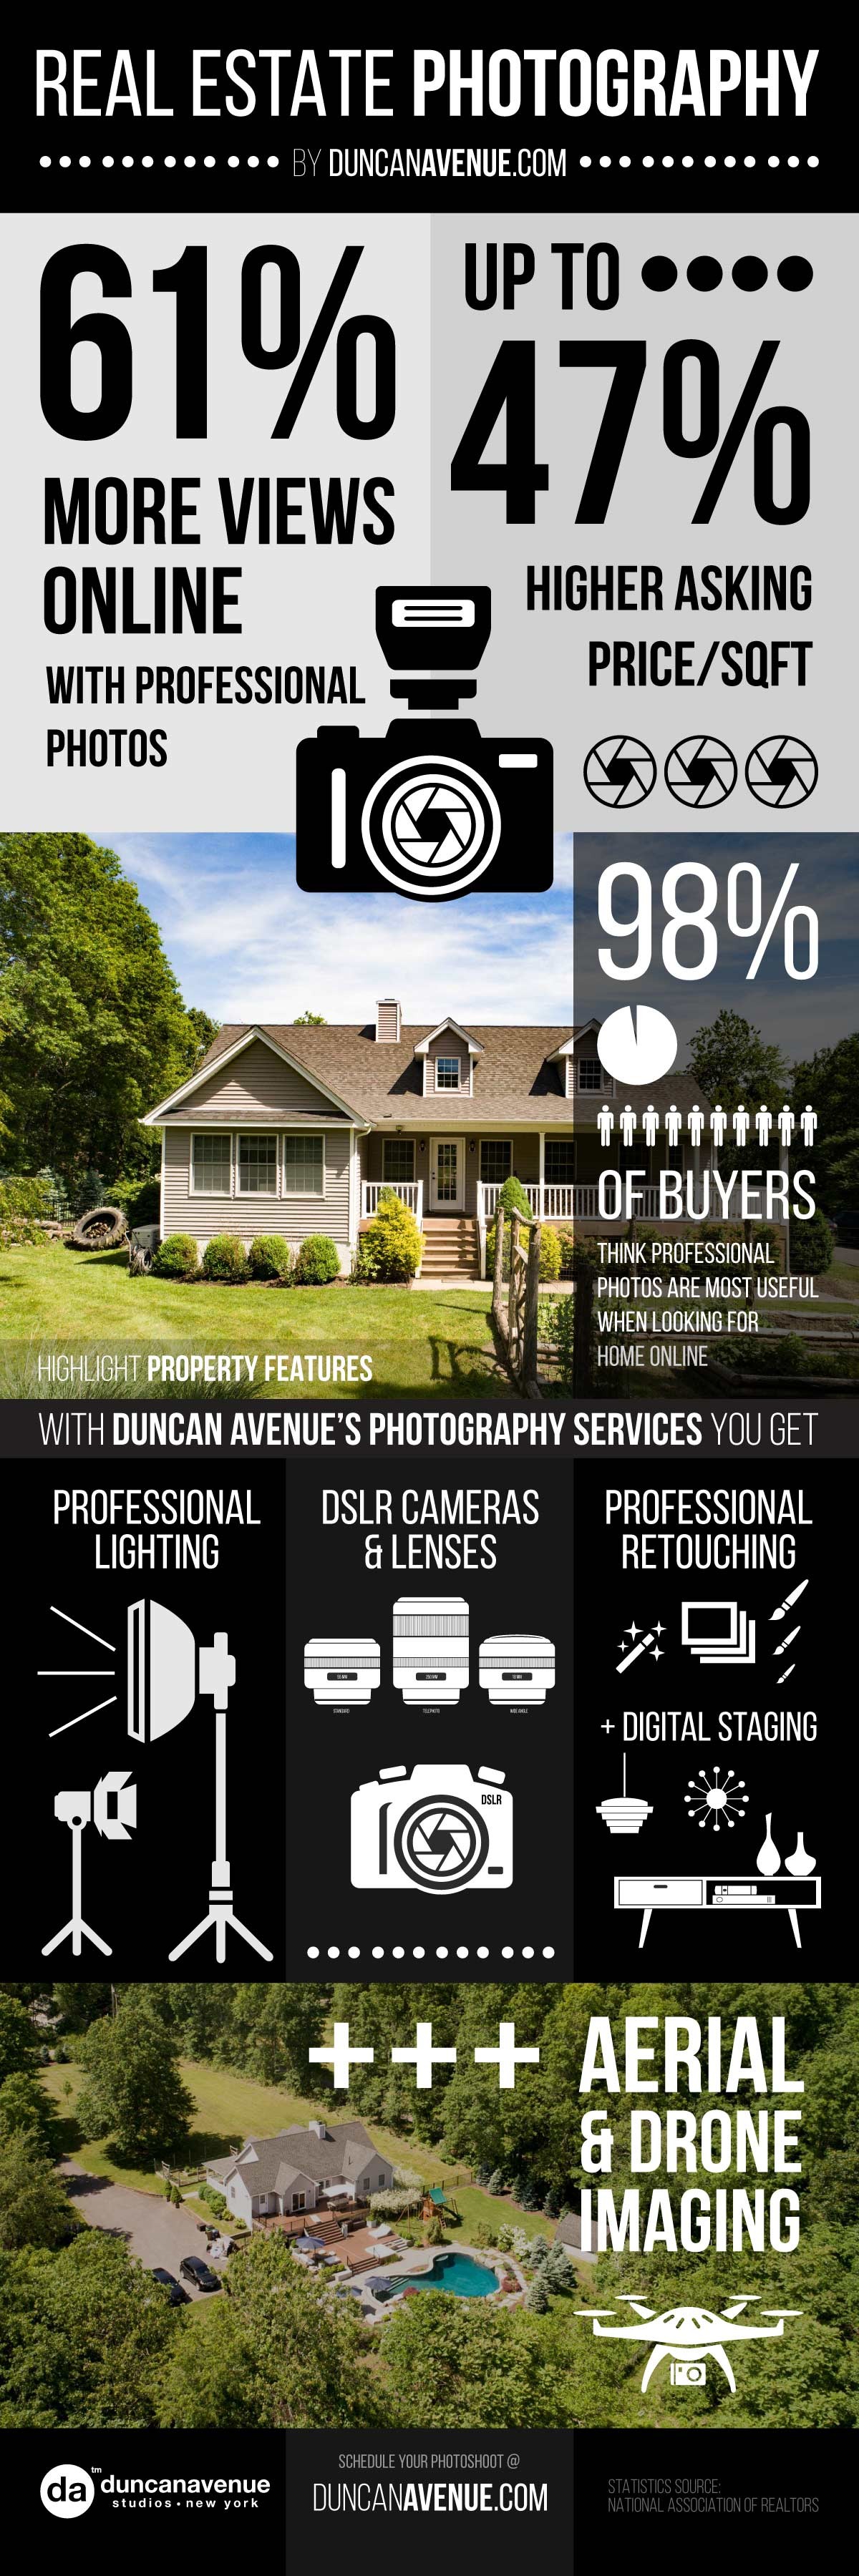 Infographic – Hudson valley, New York Real Estate Photography by Duncan Avenue Studios